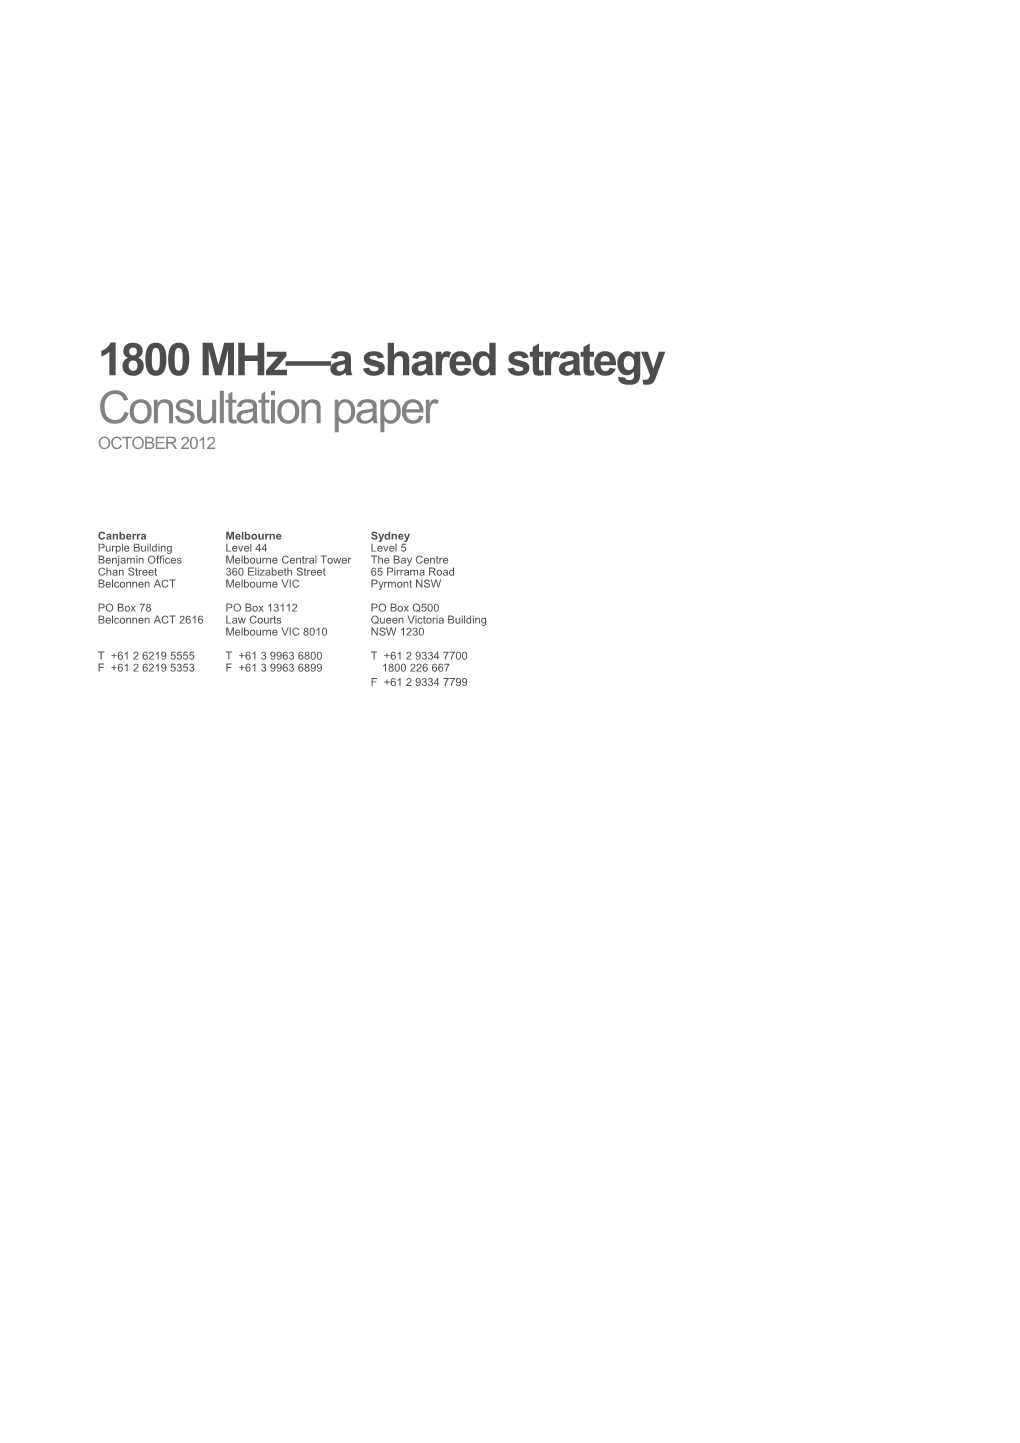 IFC 41/2012 - 1800 Mhz a Shared Strategy